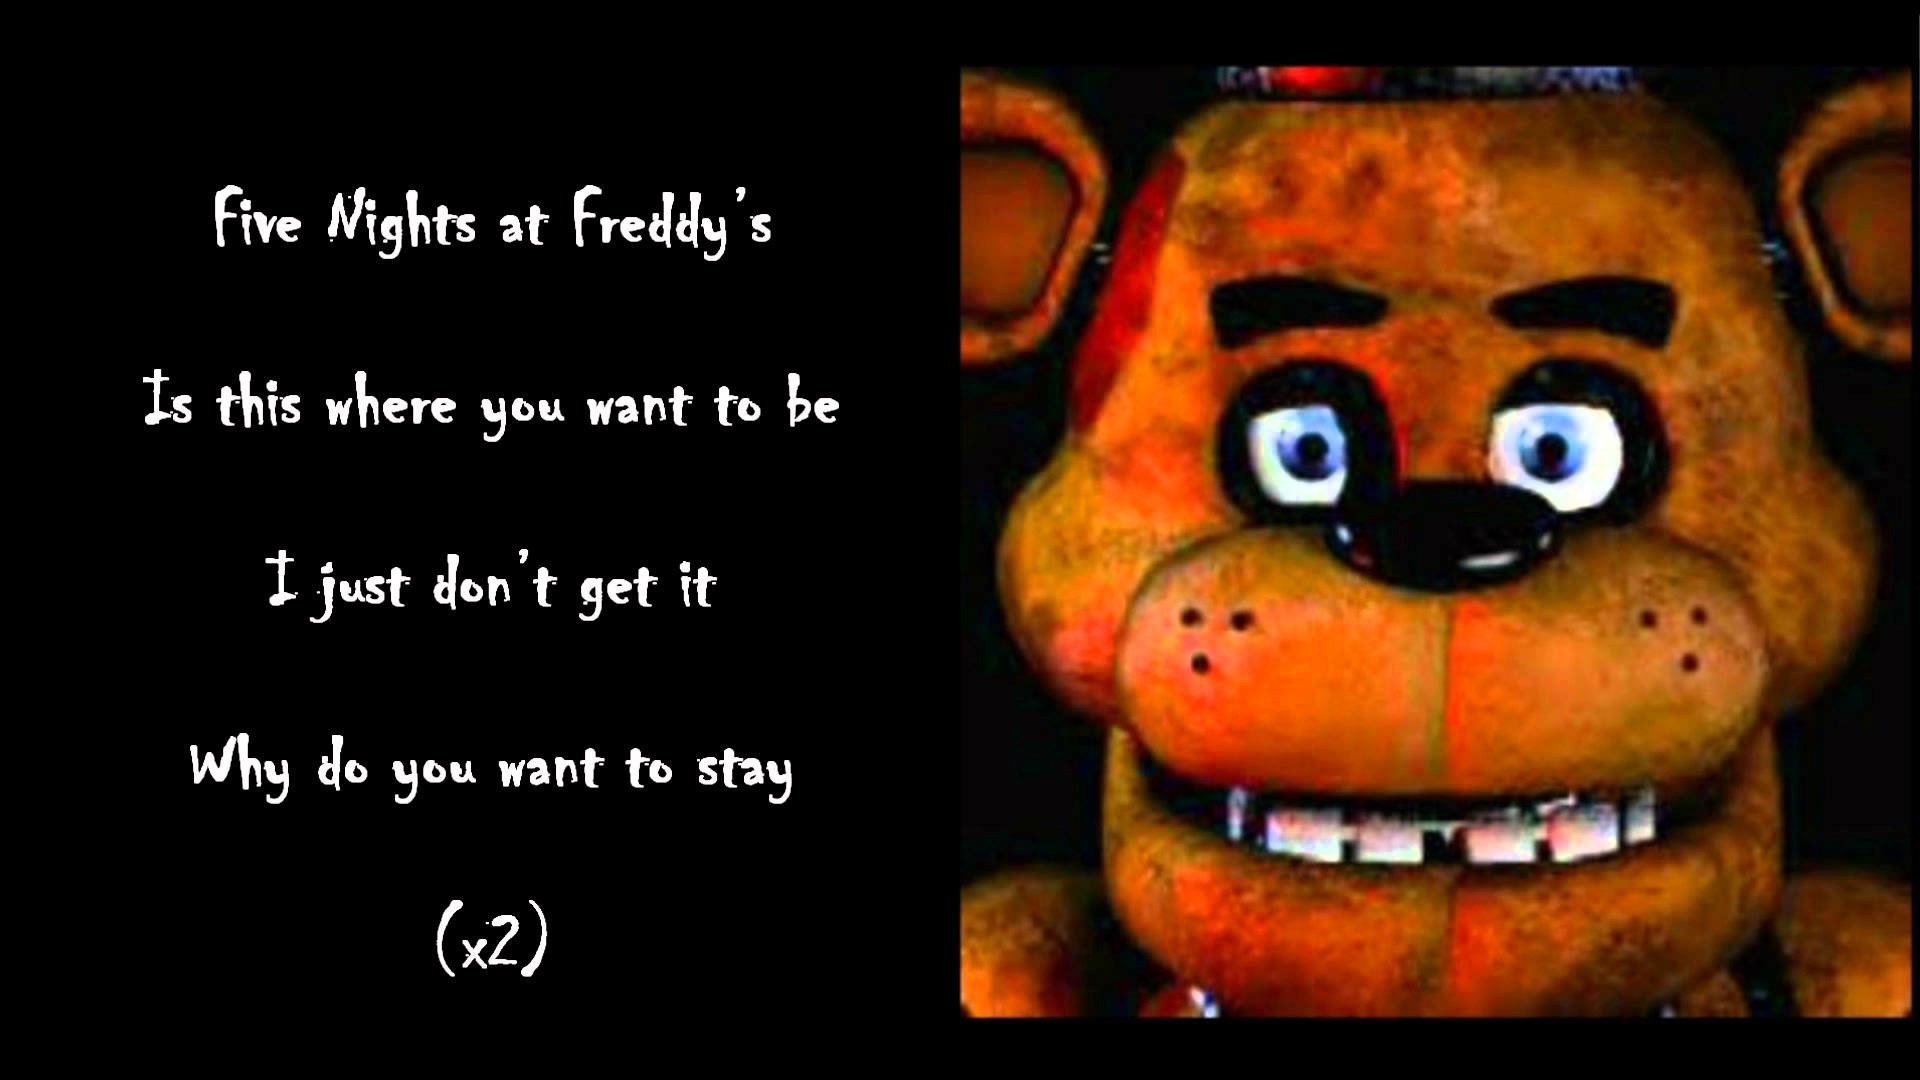 1920x1080  Five Nights at Freddy's 3 Hallucinations Wallpaper